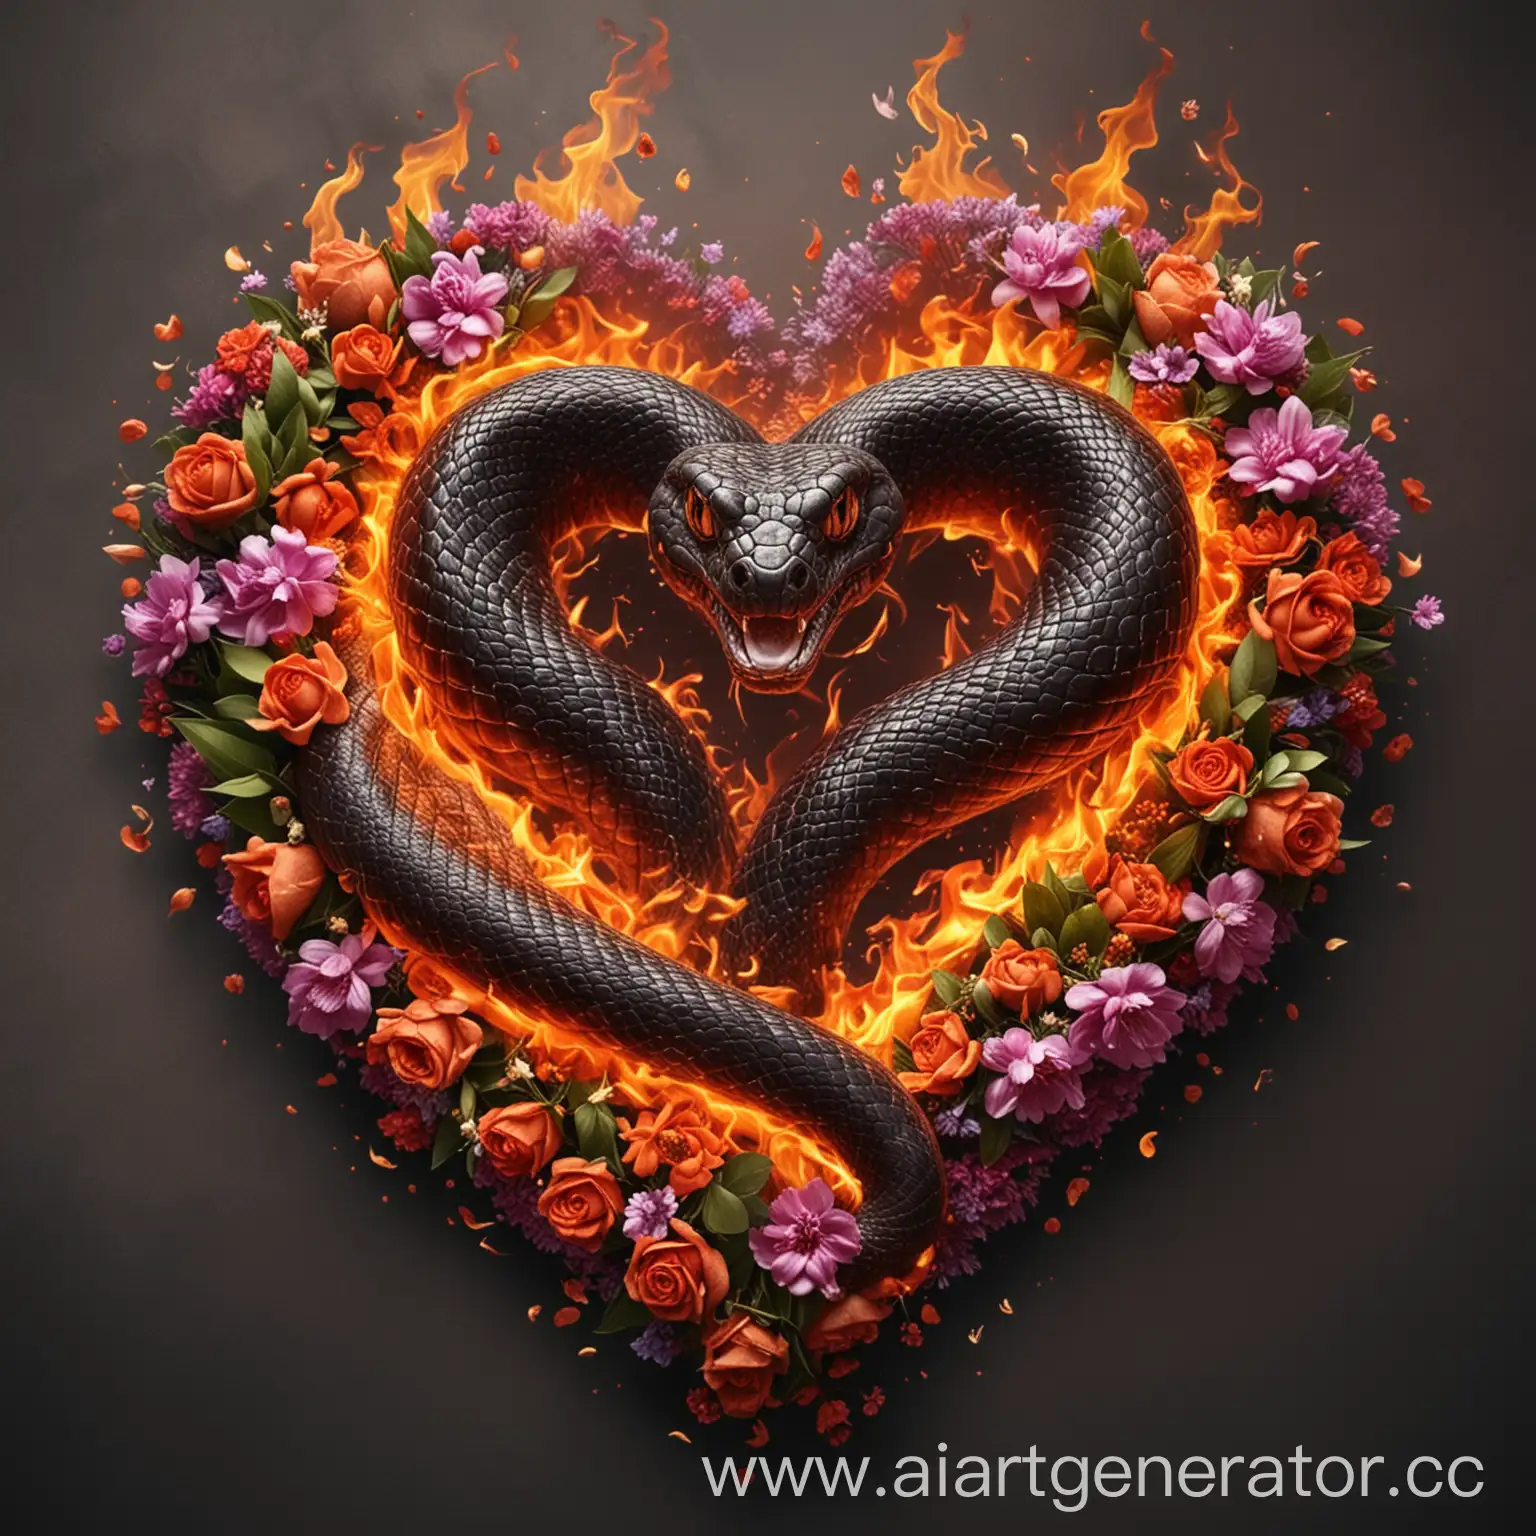 Flaming-Heartshaped-Serpent-amidst-Floral-Background